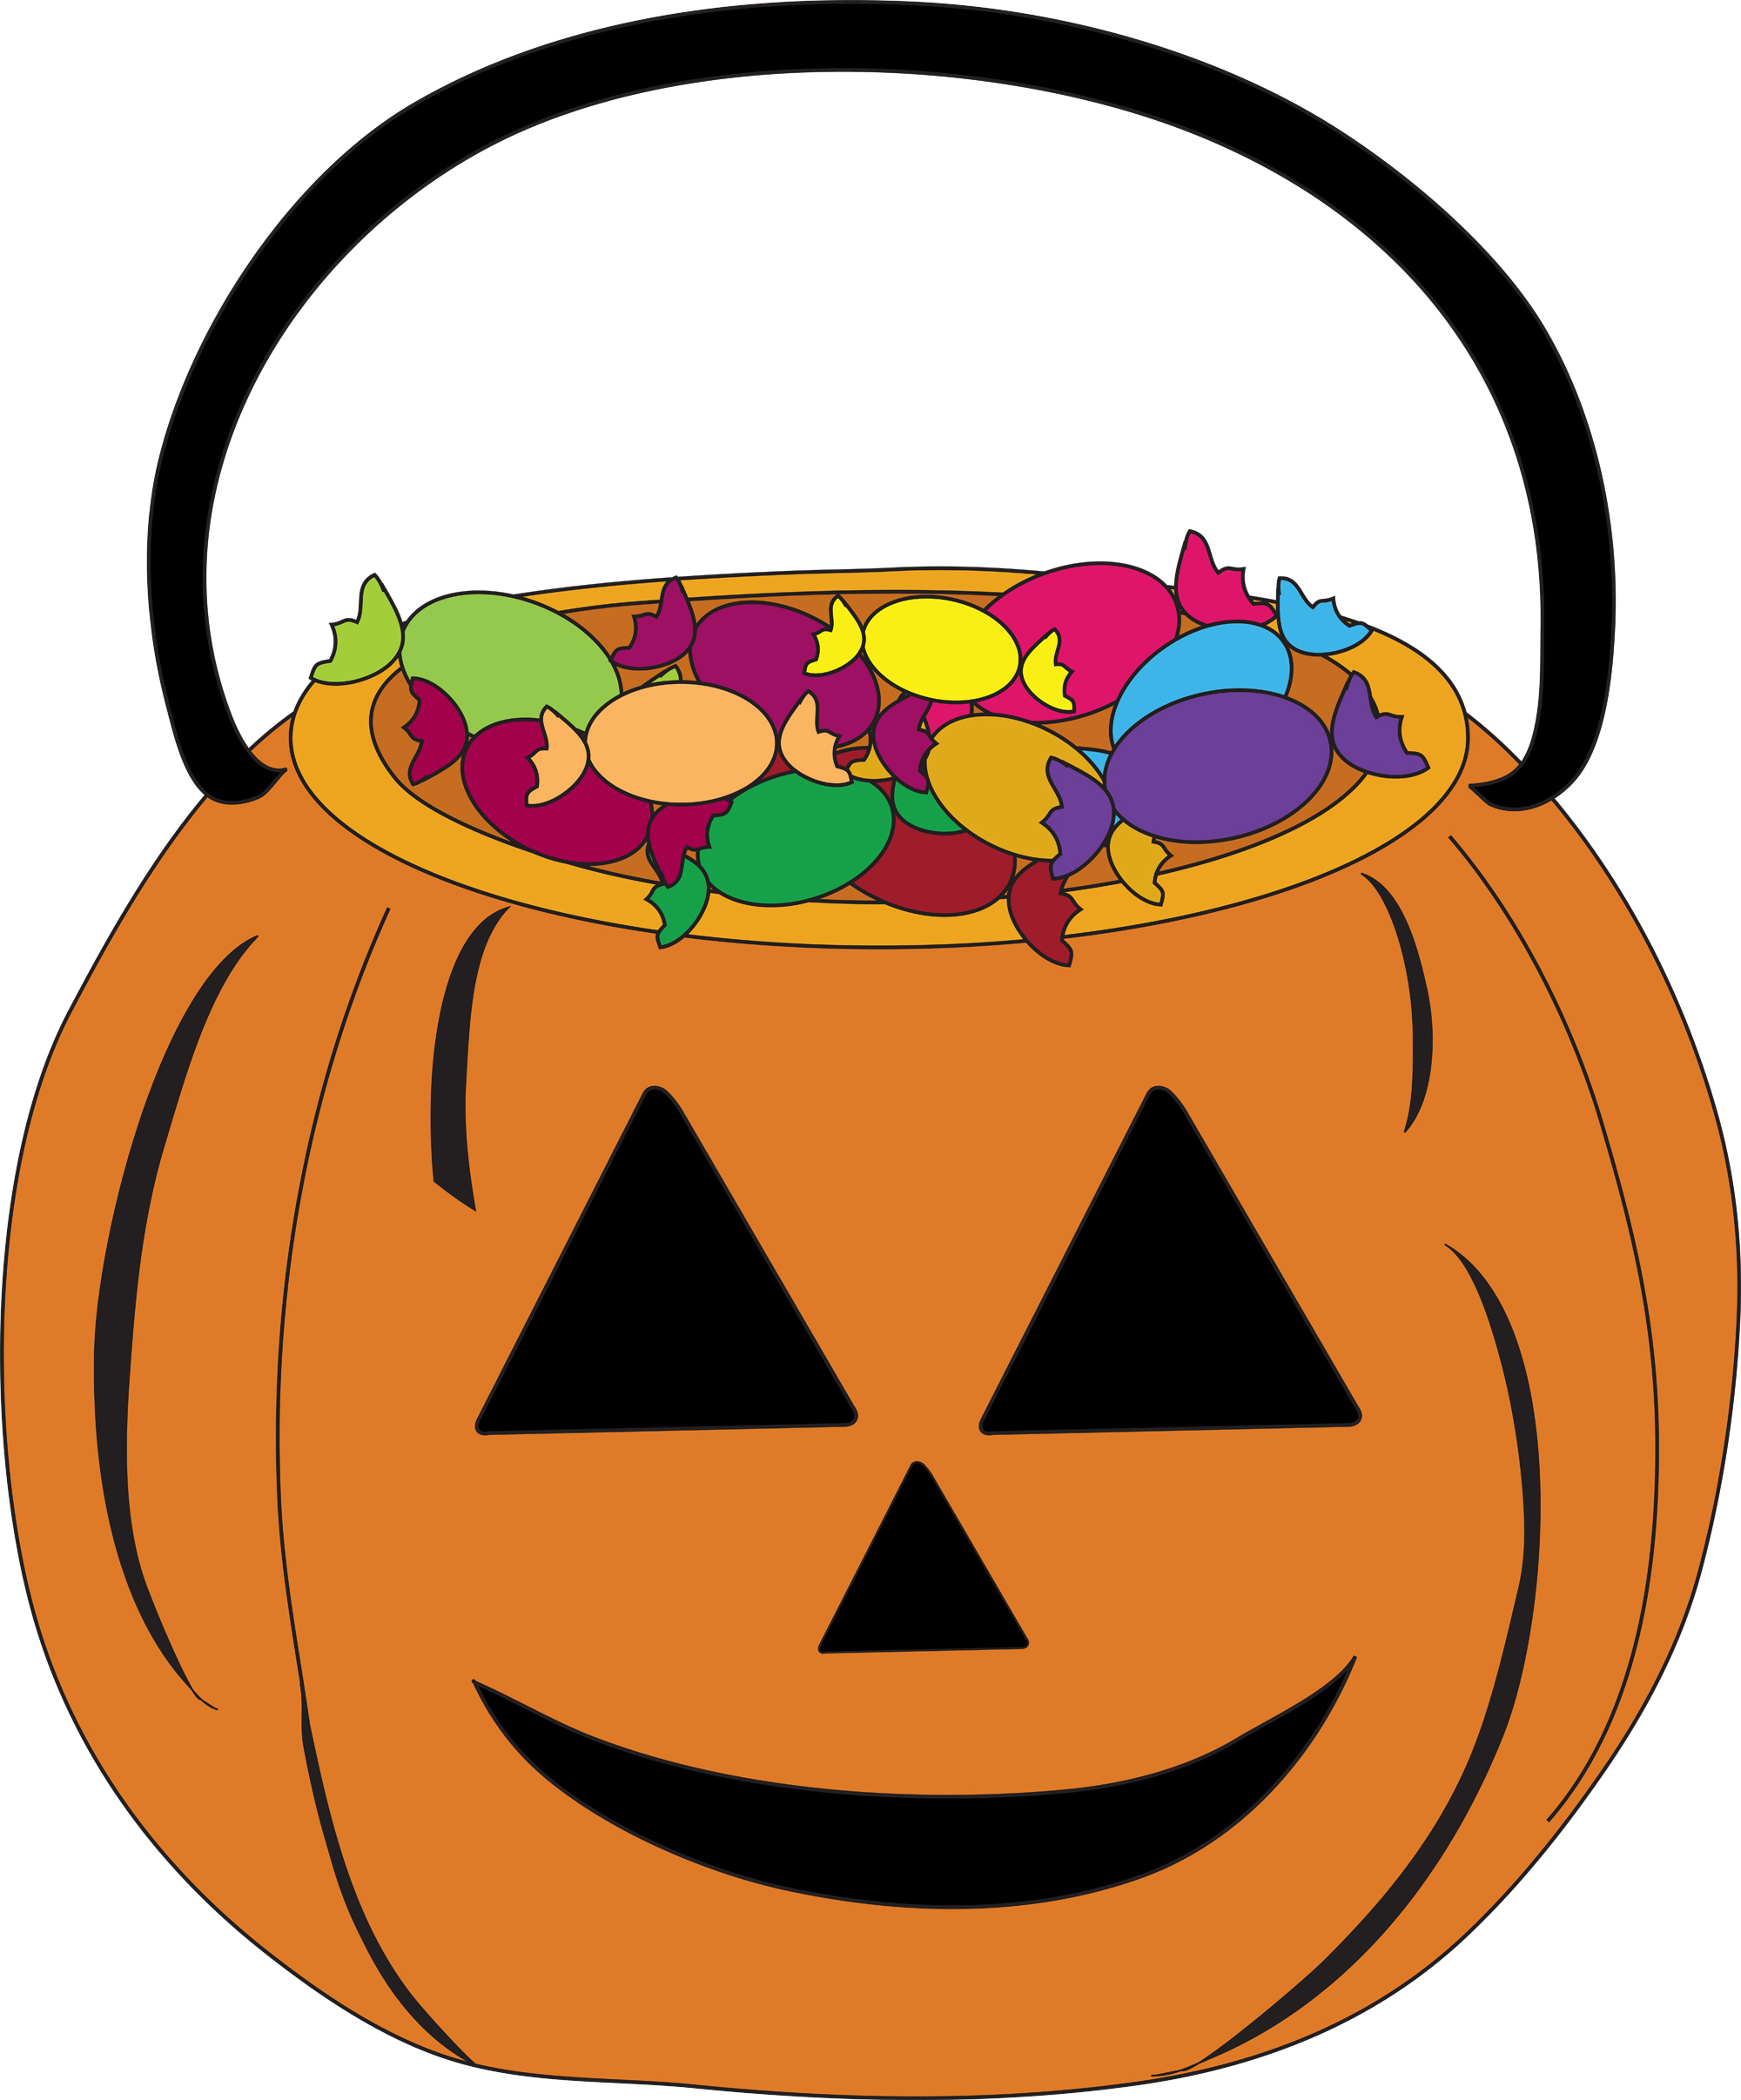 Halloween candy clip art free clipart images 2